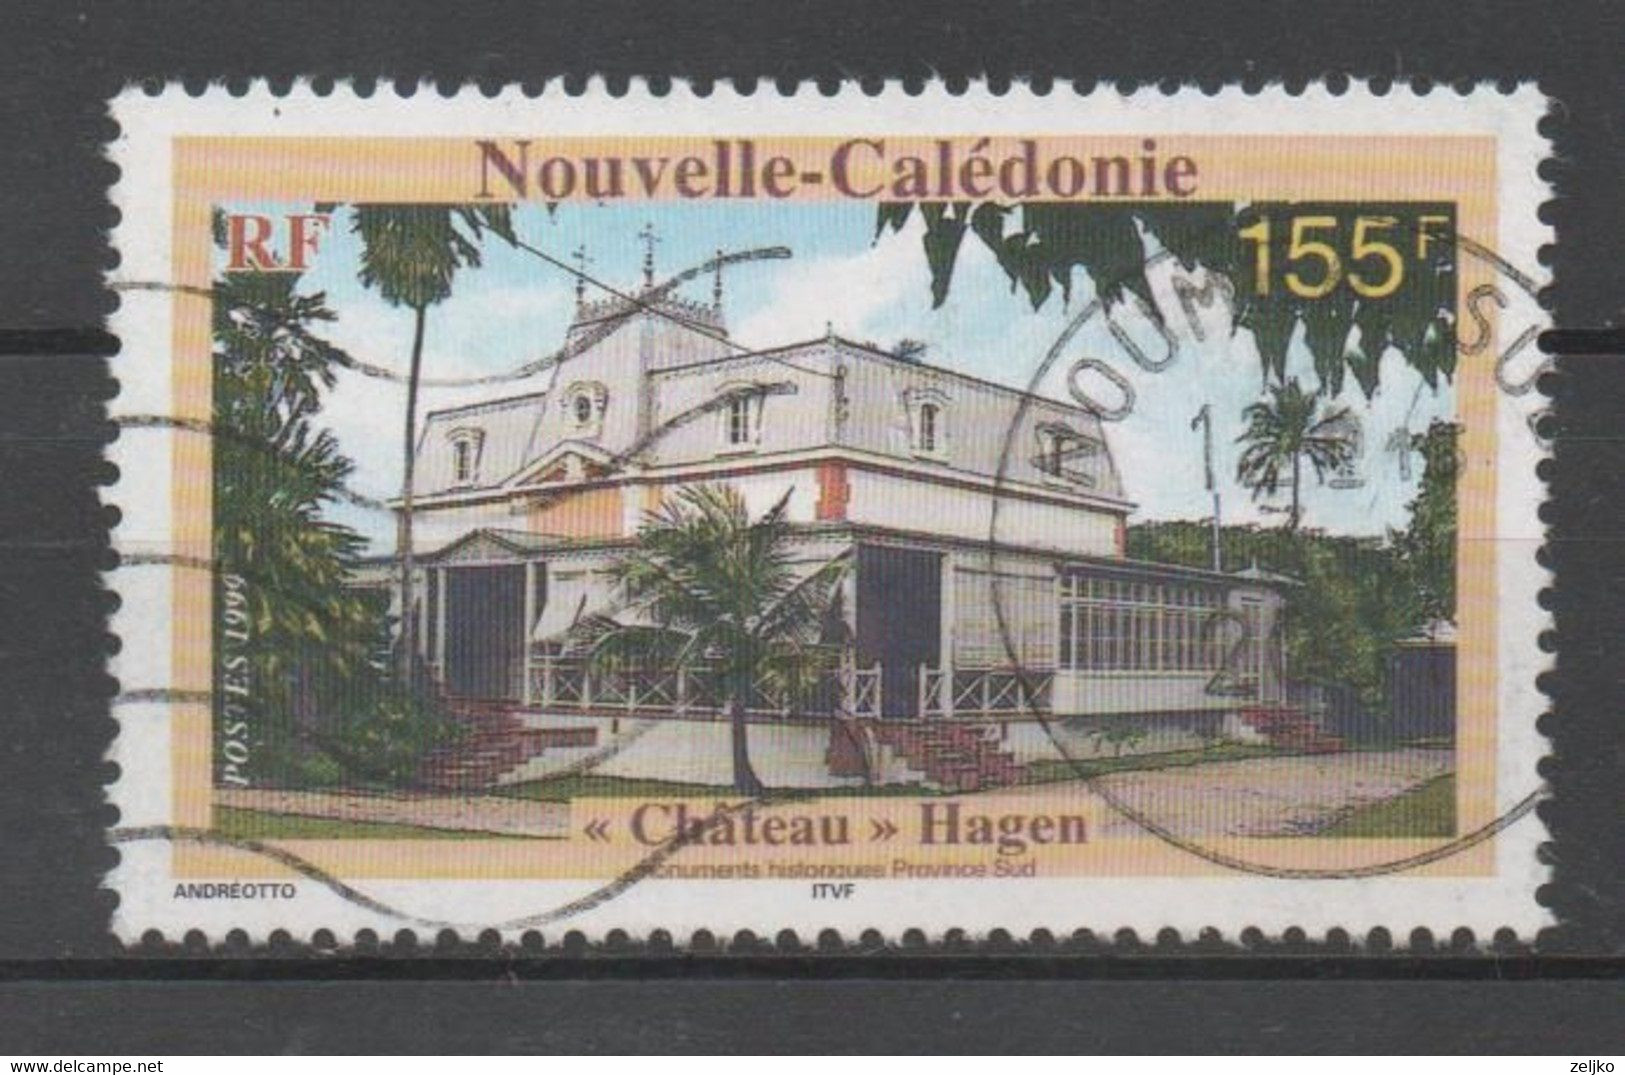 New Caledonia, Used, 1999, Michel 1191 - Used Stamps